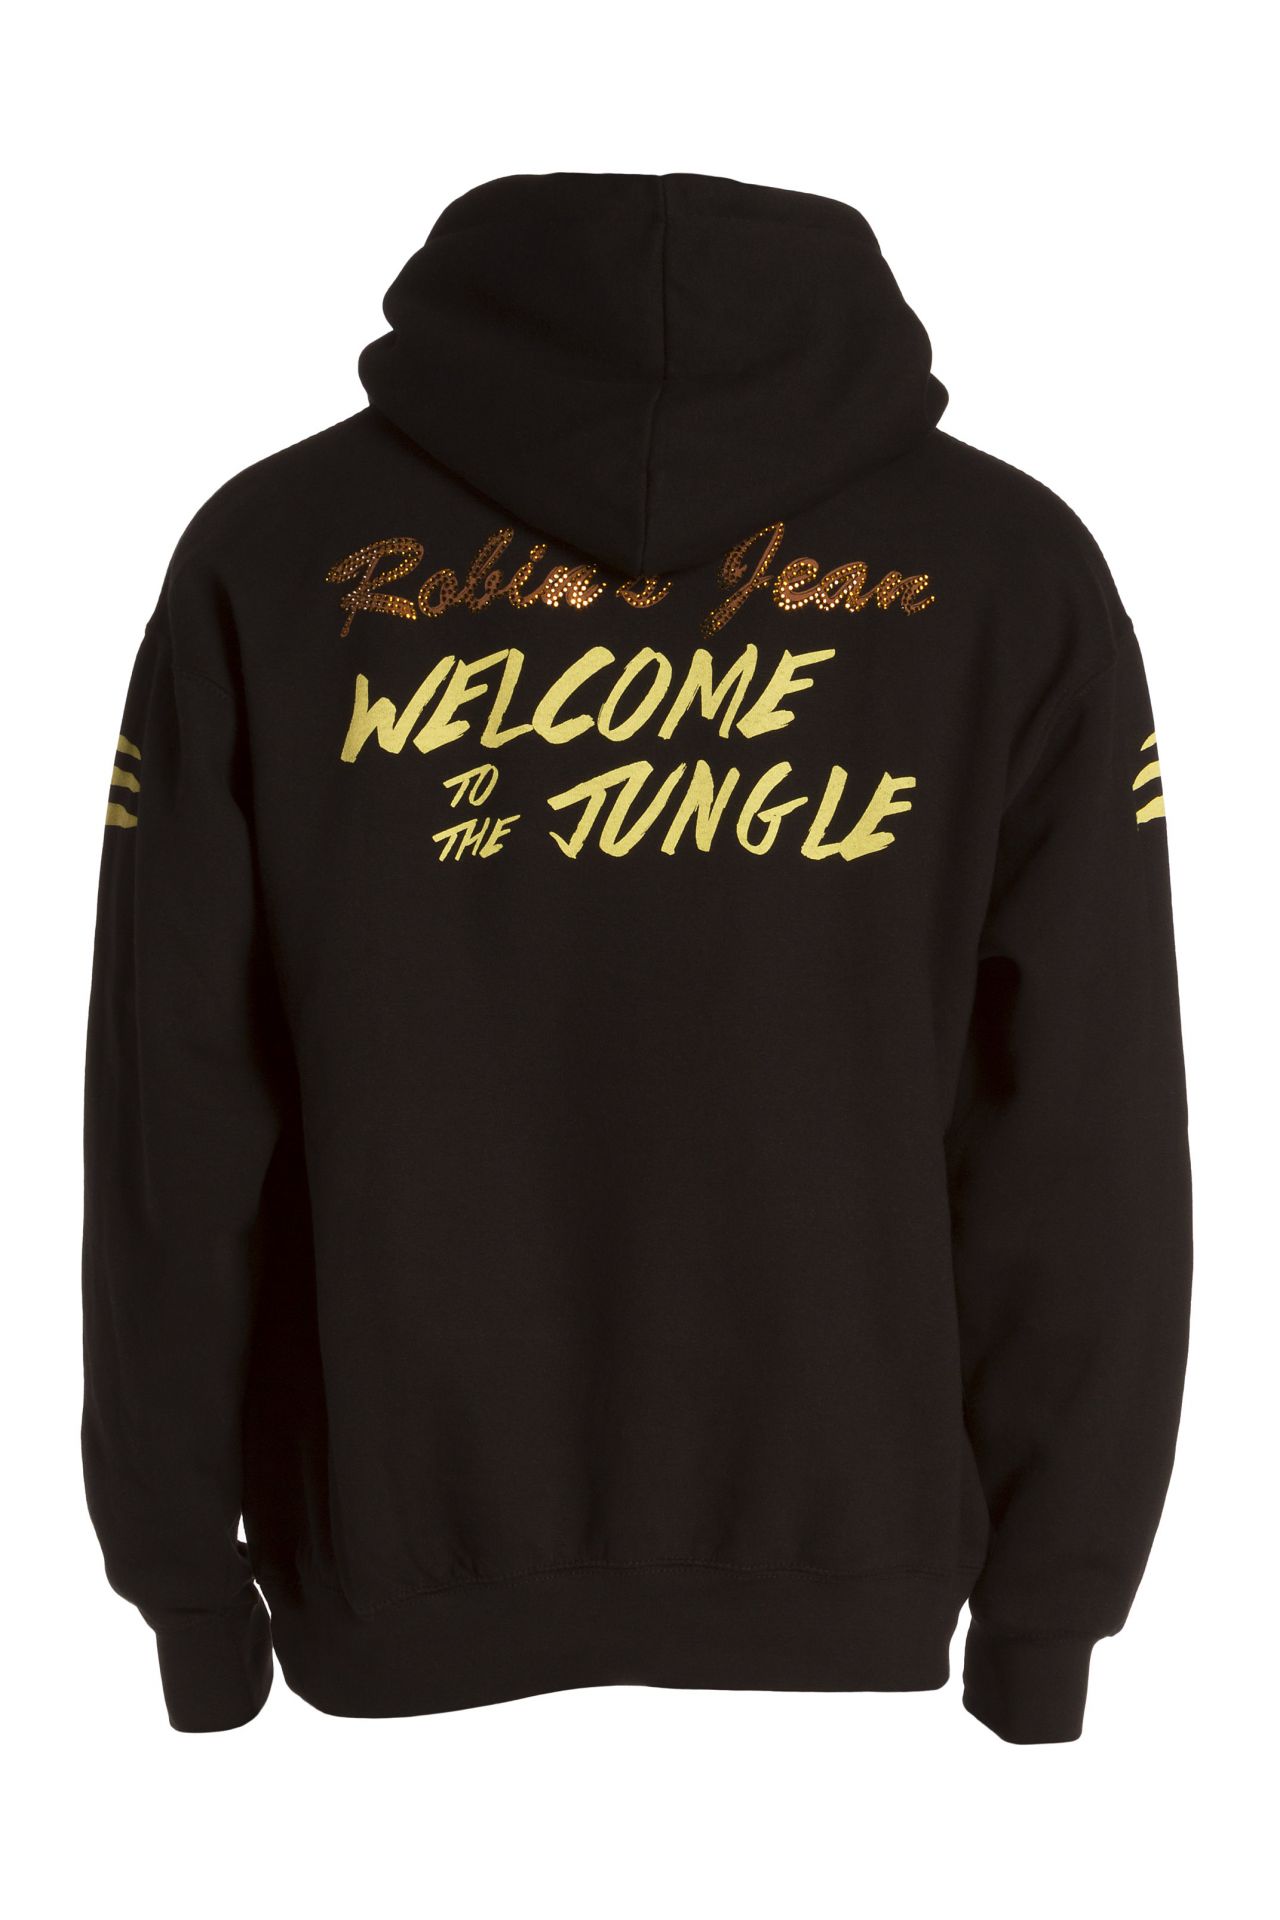 GOLDEN TIGER PULLOVER HOODIE WITH CRYSTALS IN BLACK